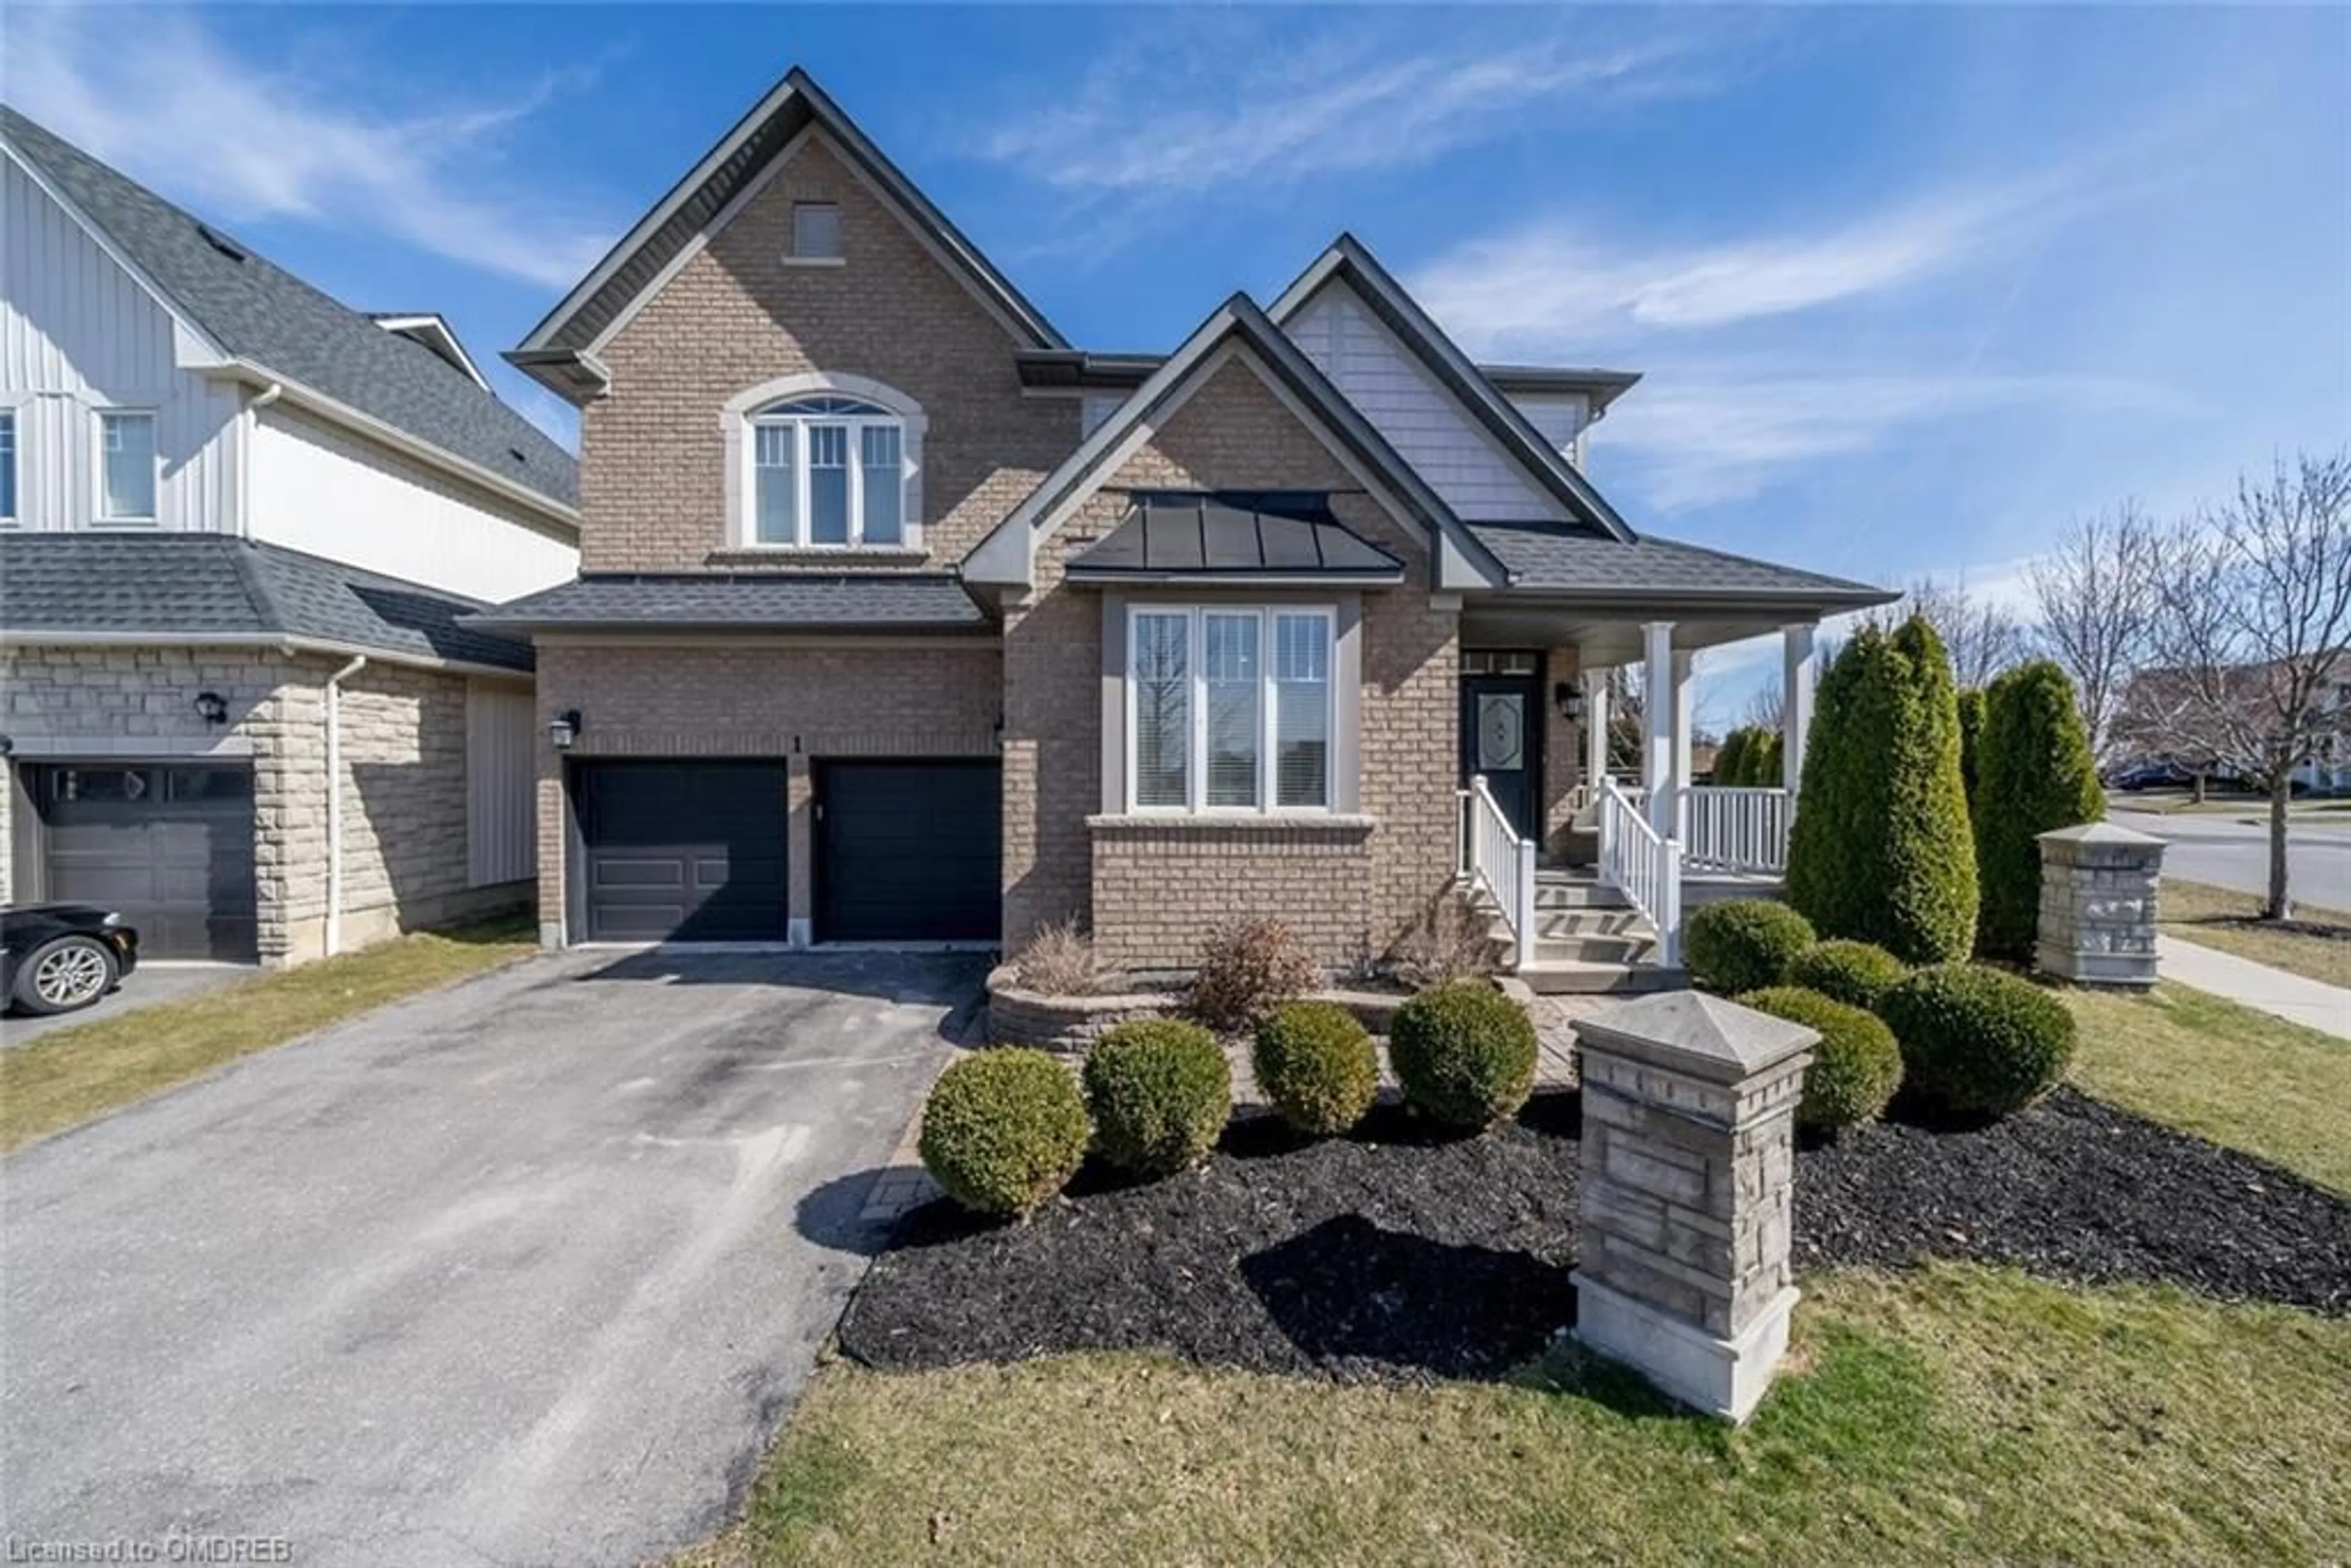 Frontside or backside of a home for 1 Archstone St, Whitby Ontario L1R 3E3